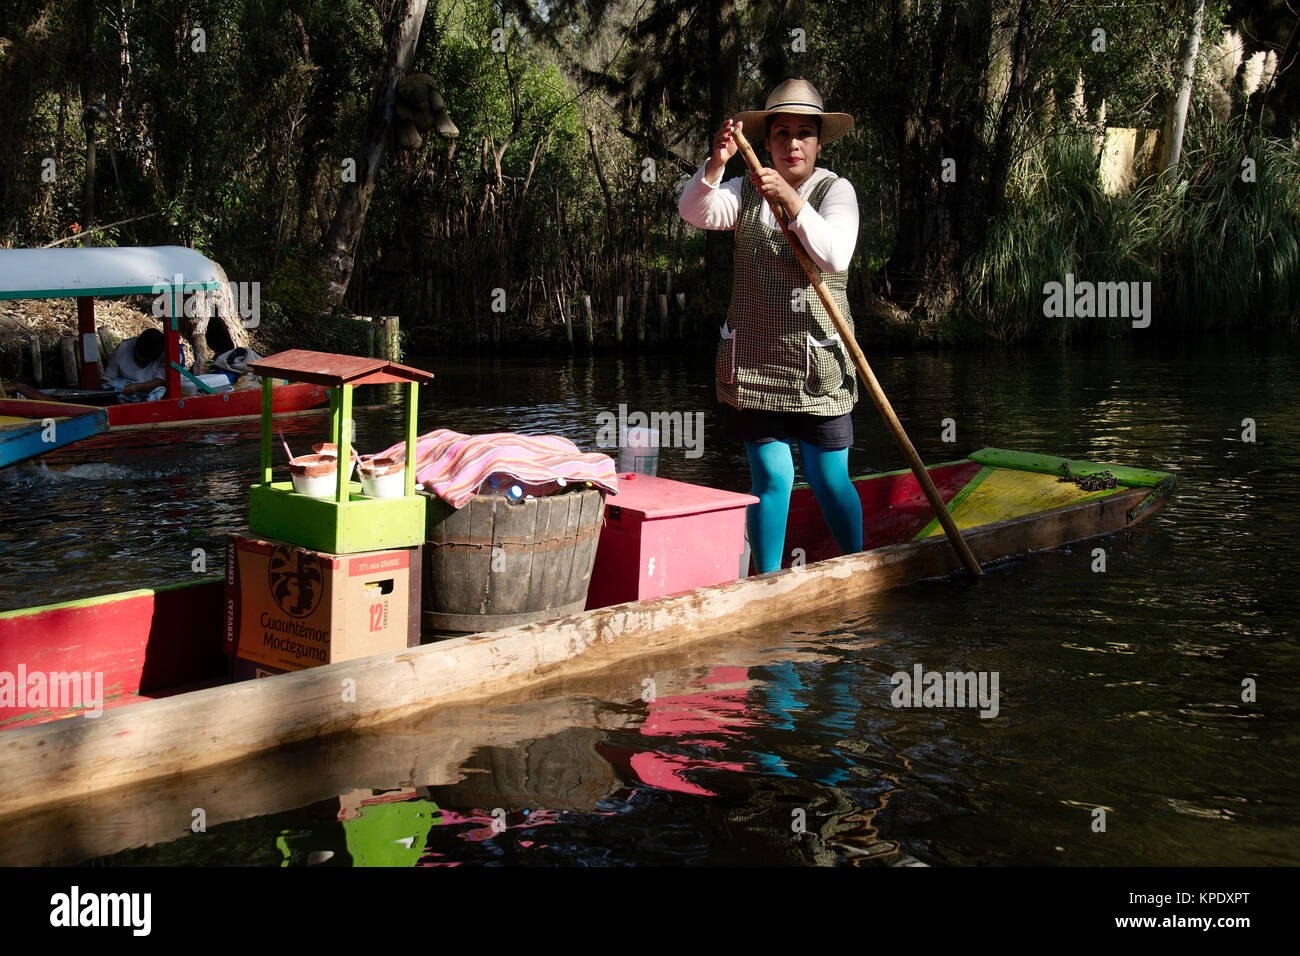 Xochimilco, Mexico City, Mexico - 2017: A woman in a trajinera (a local type of boat) sells cold beverages to people in other trajineras on a canal Stock Photo